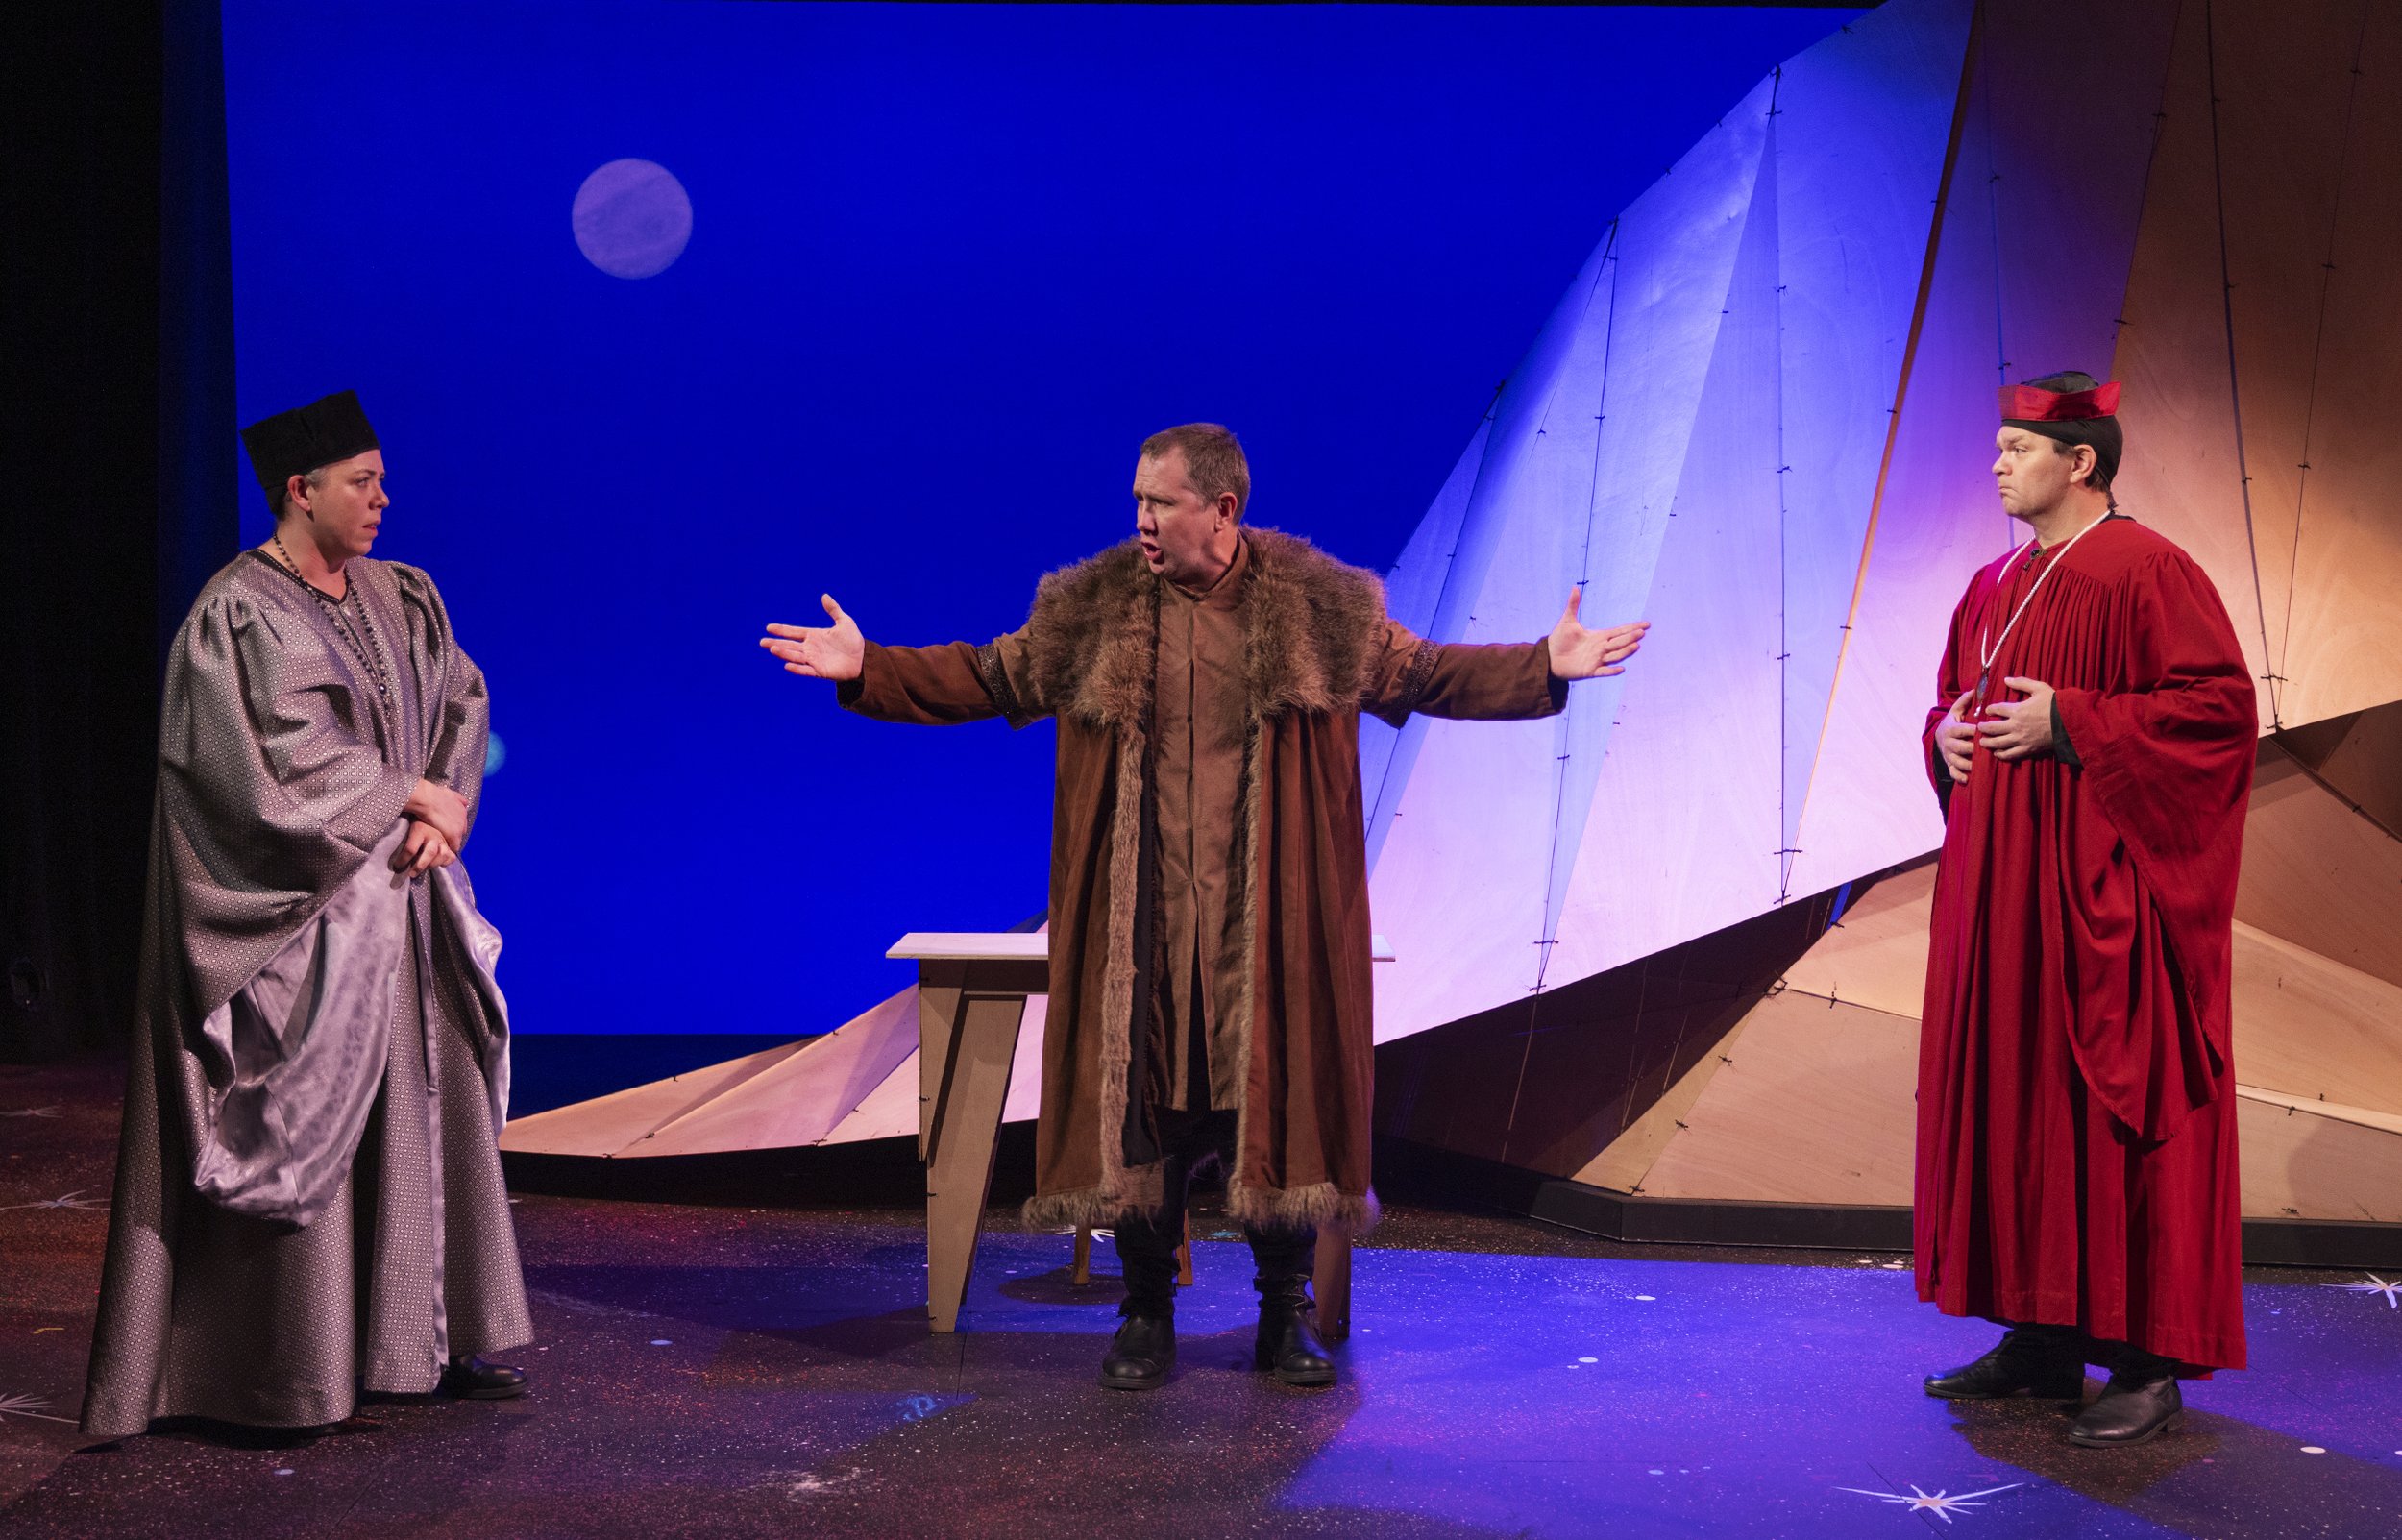 Chelsea Bowdren as Obsle, Matt Walley as Estraven, and Ryan Parker Knox as Yegey. Photo courtesy of Tim Fuller.